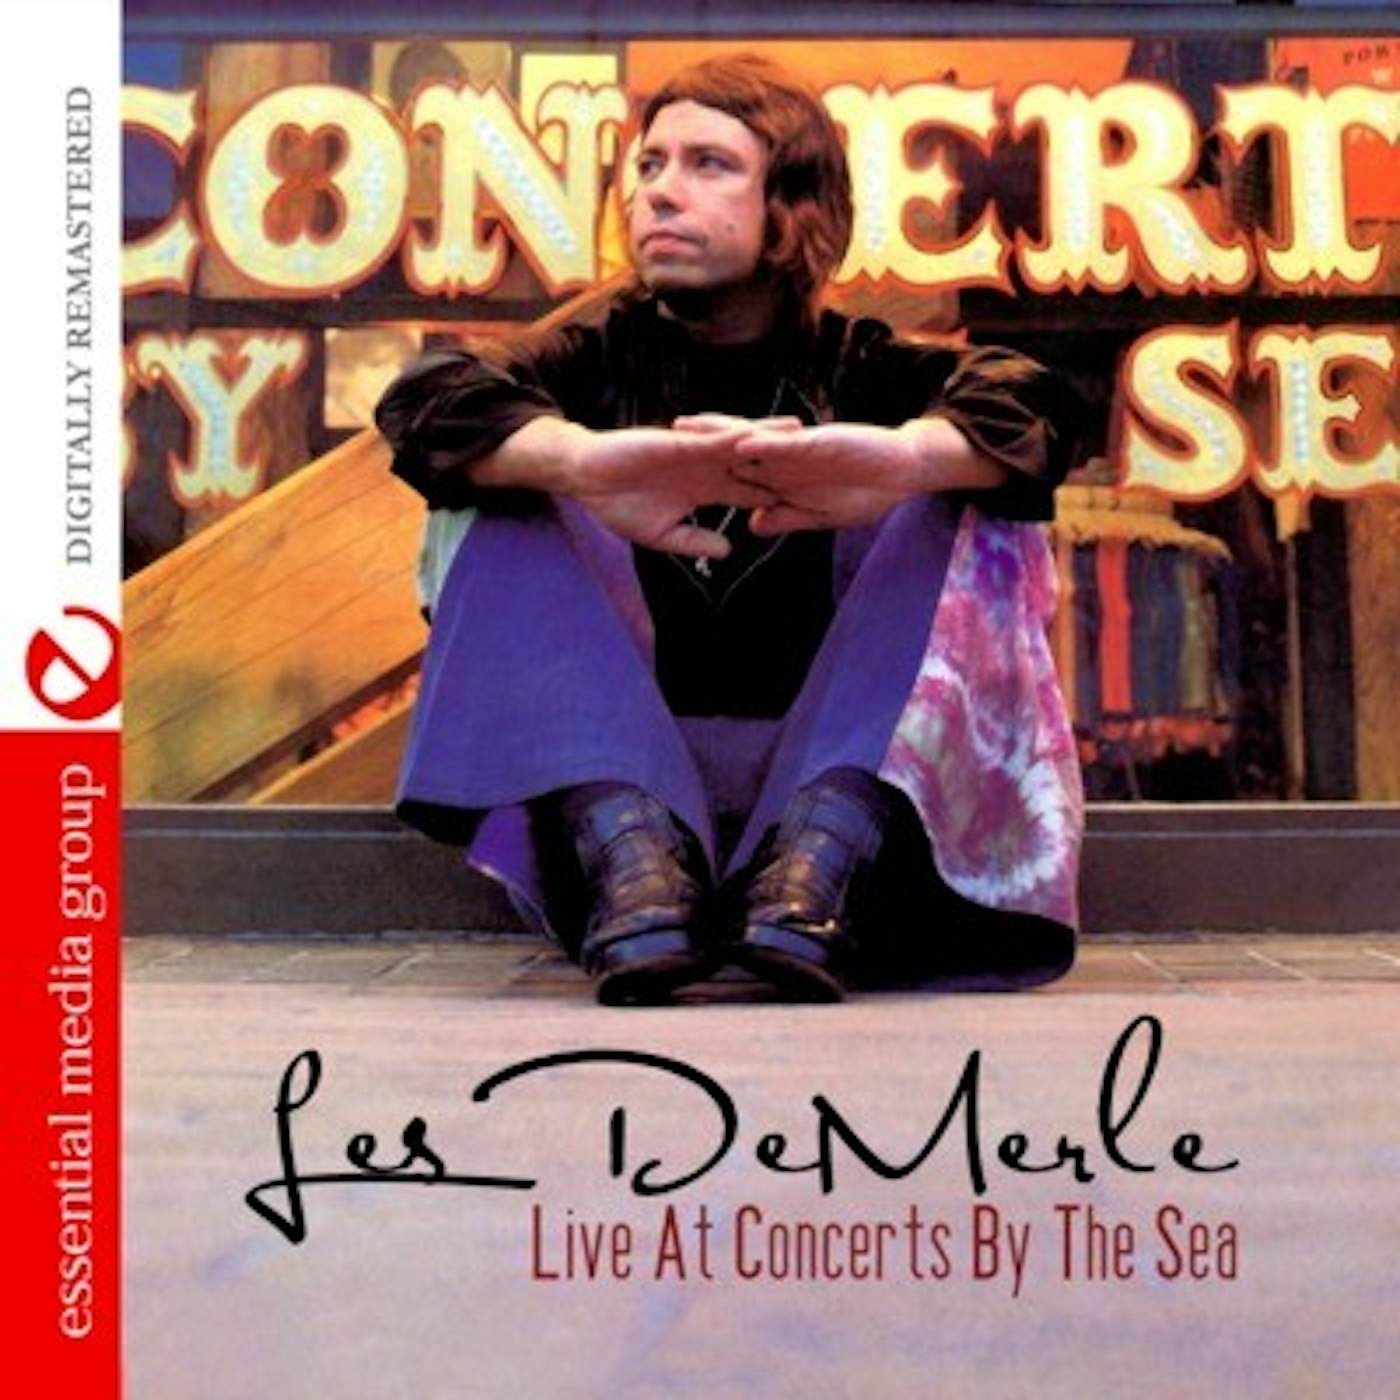 Les DeMerle LIVE AT CONCERTS BY THE SEA CD